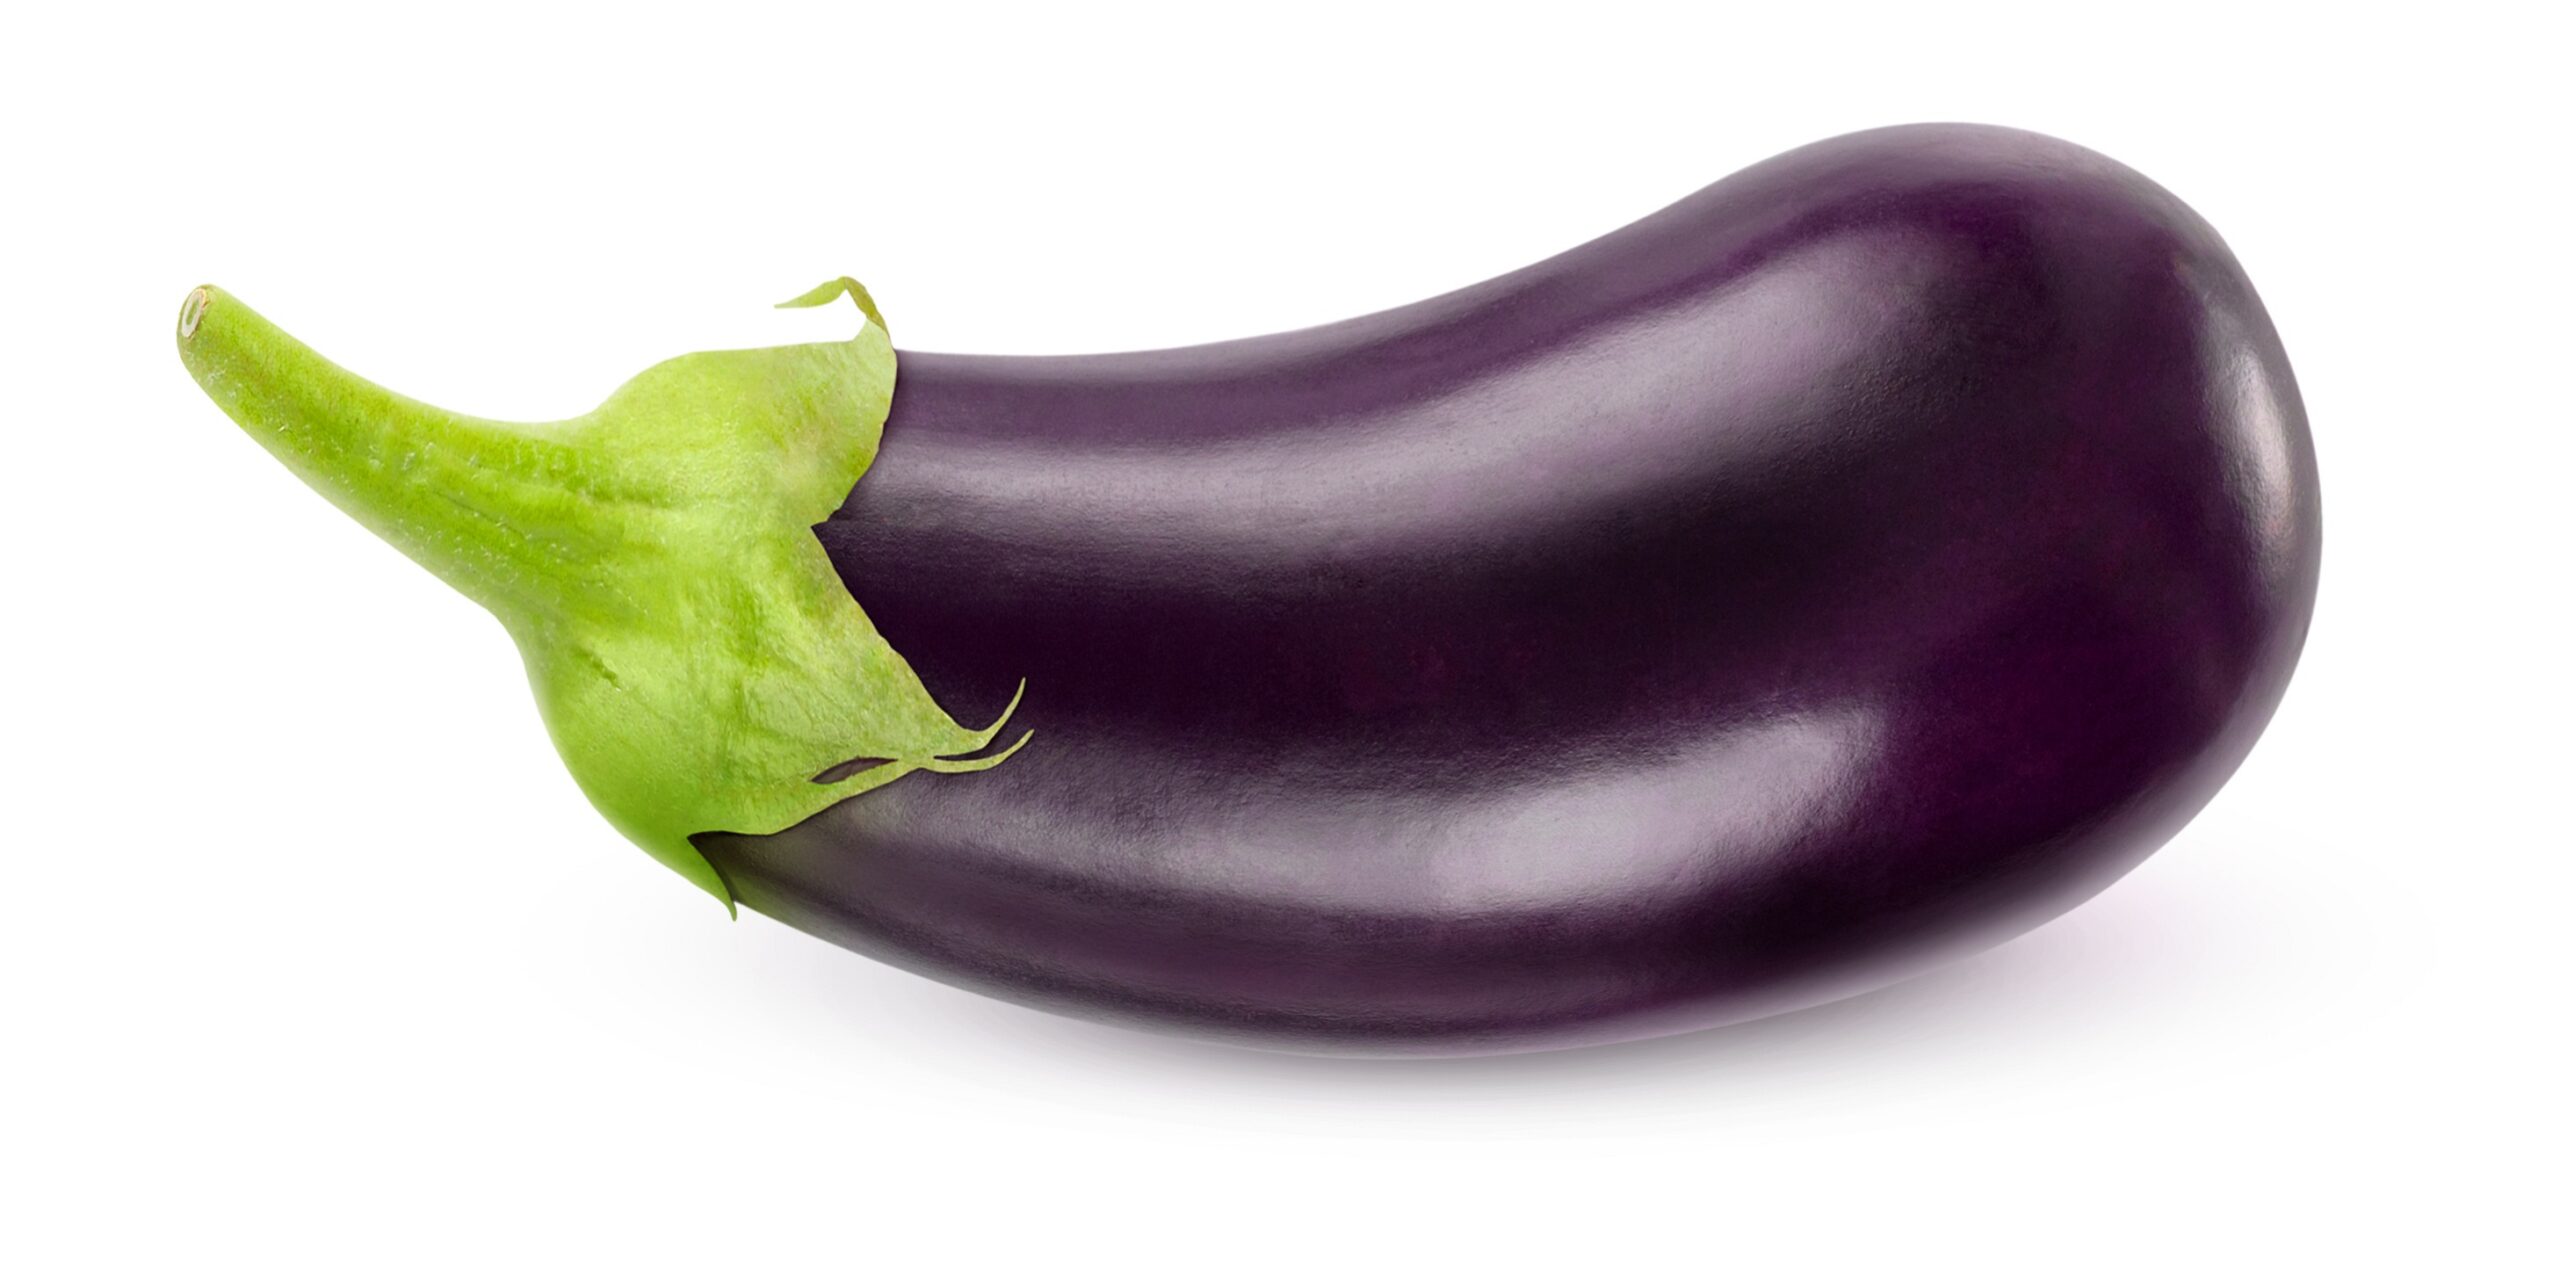 Eggplant – ingredients, effects and application